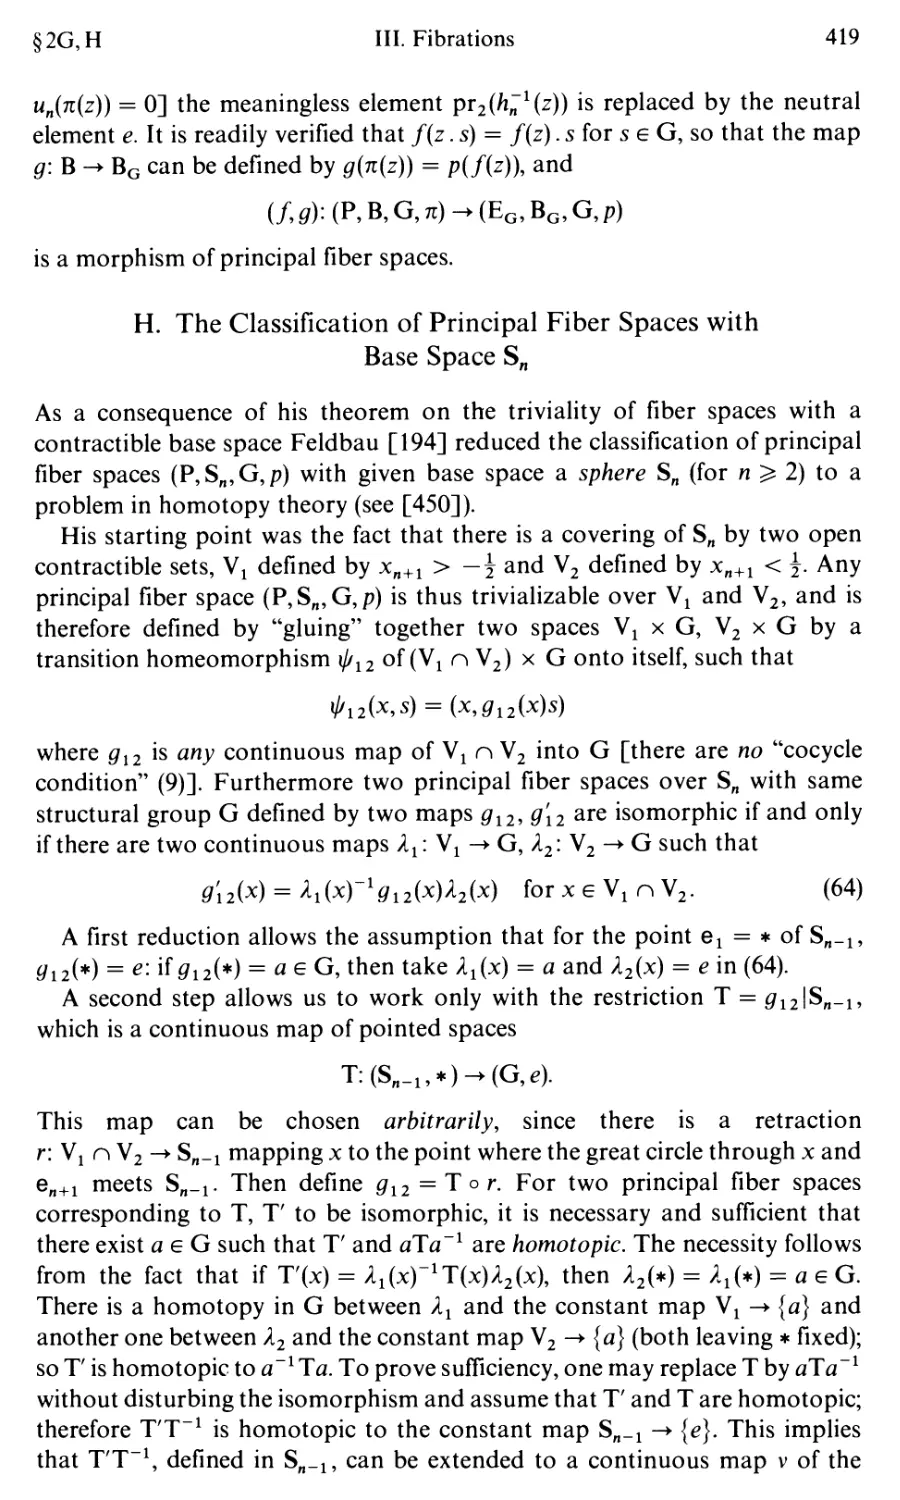 H. The Classification of Principal Fiber Spaces with Base Space S_n